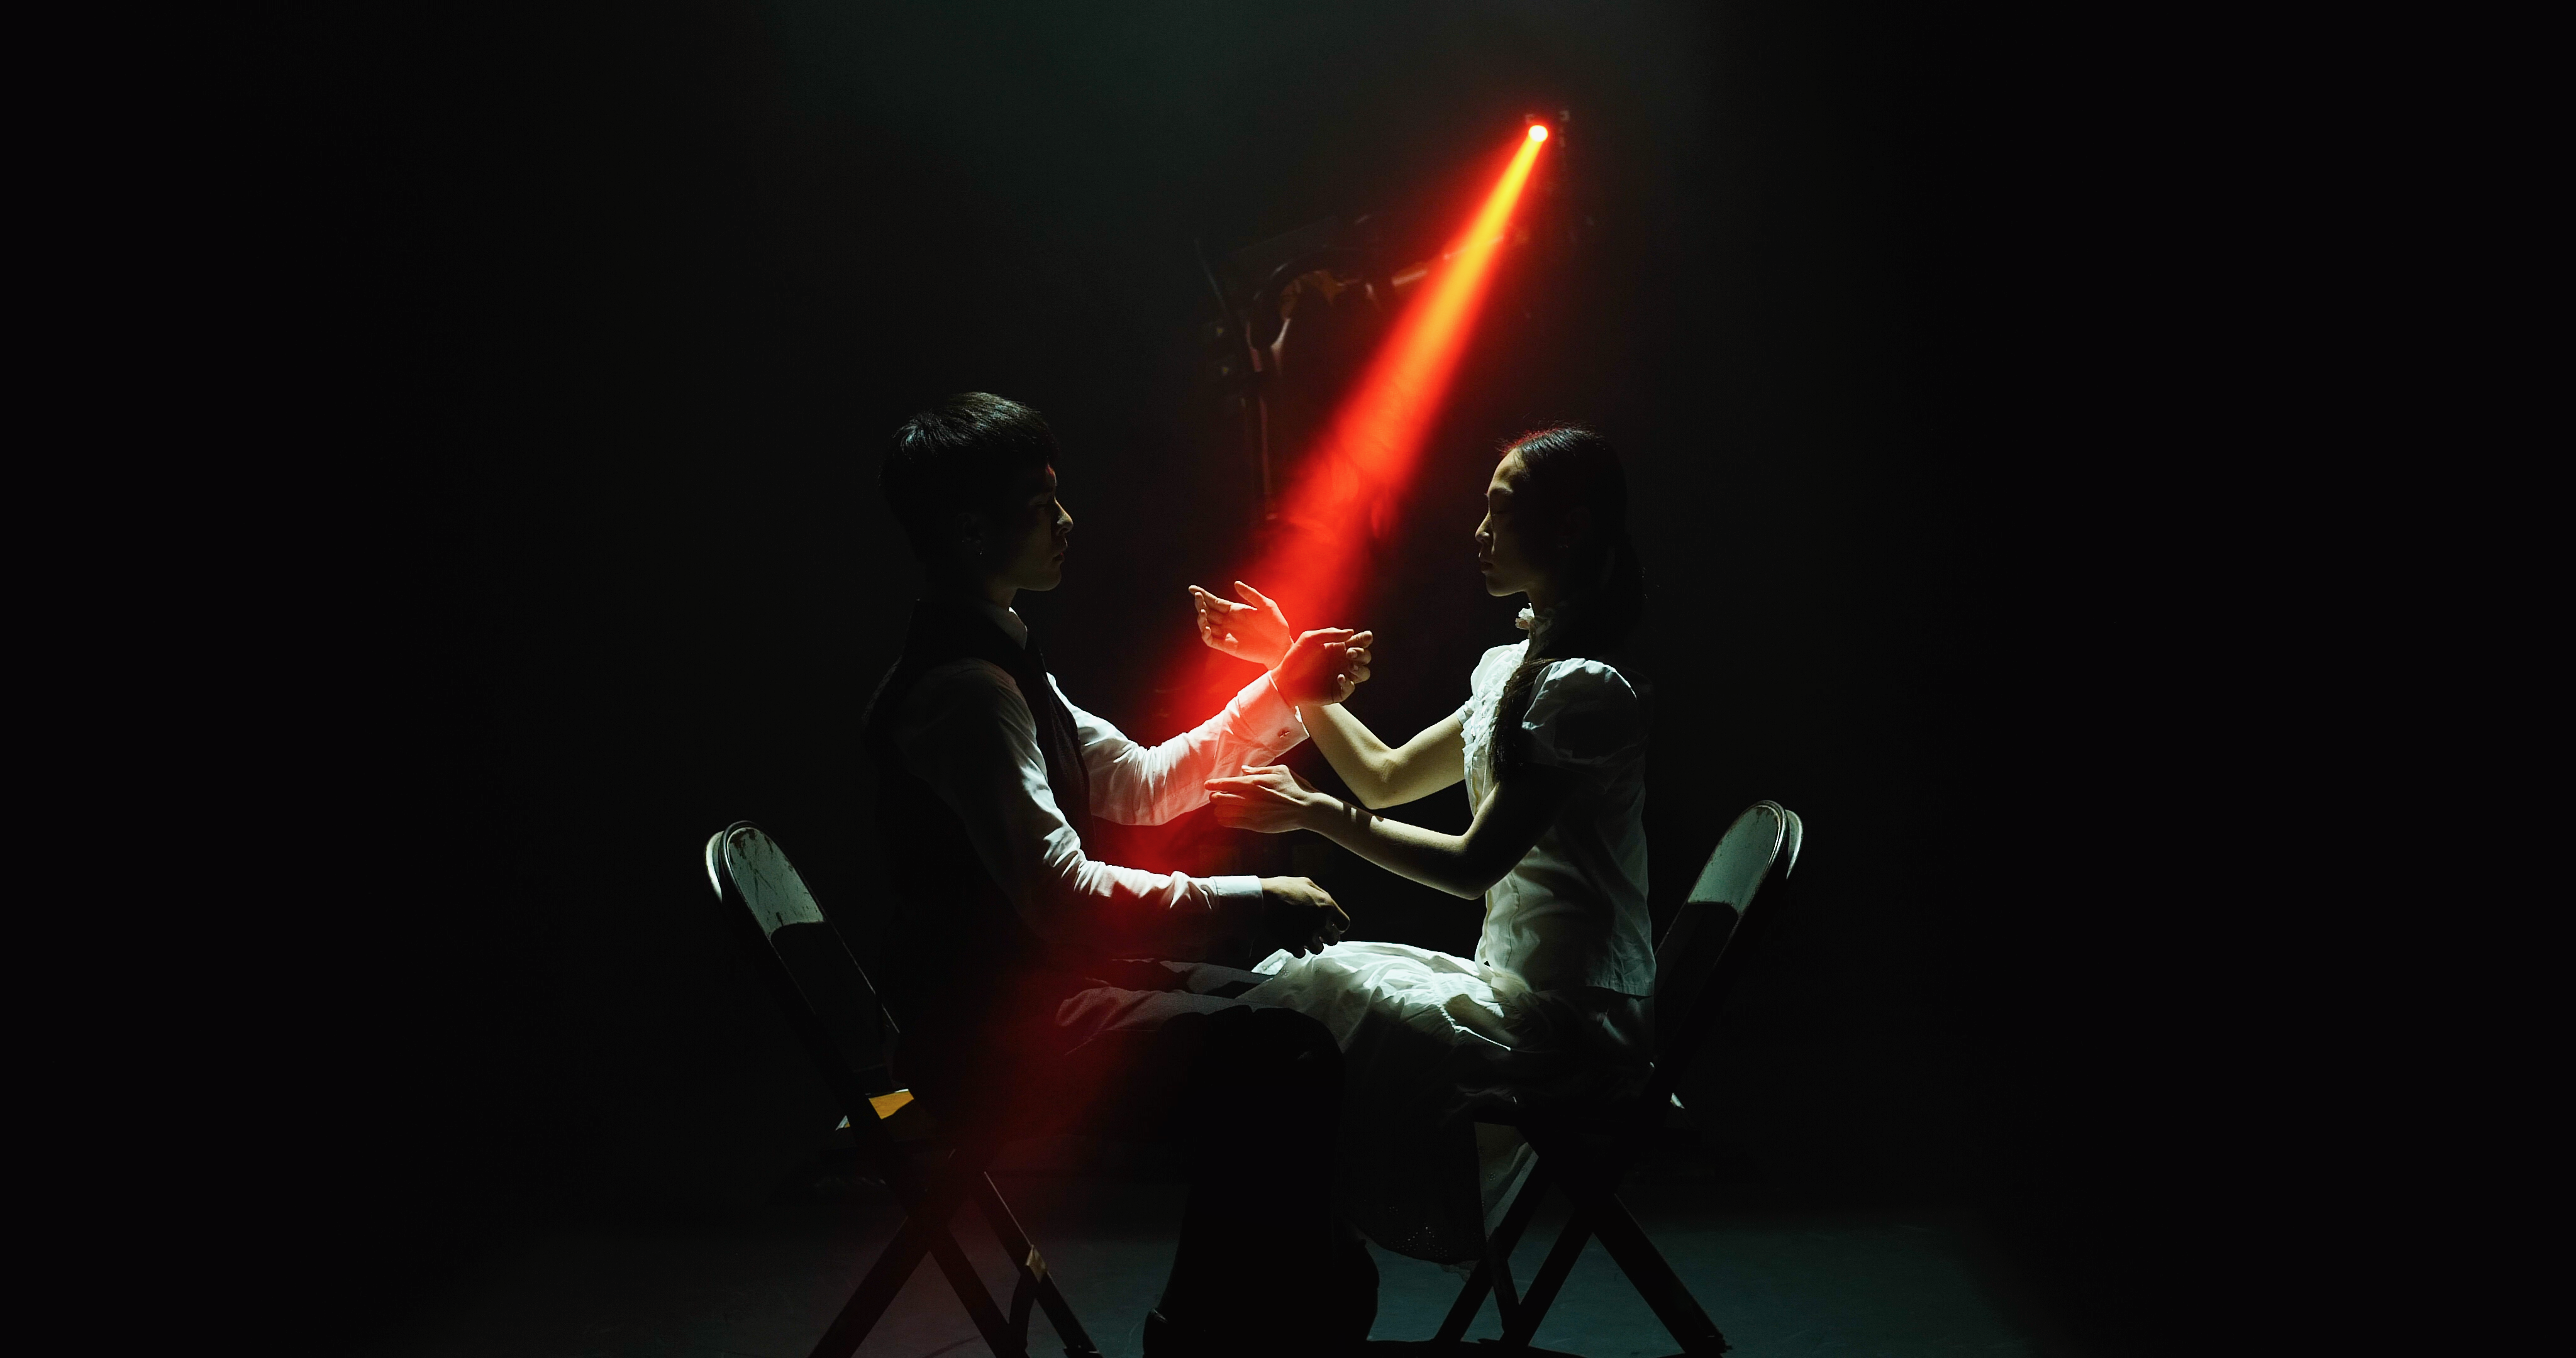 Huang Yi and another dancer on stage with a light from KUKA the robot